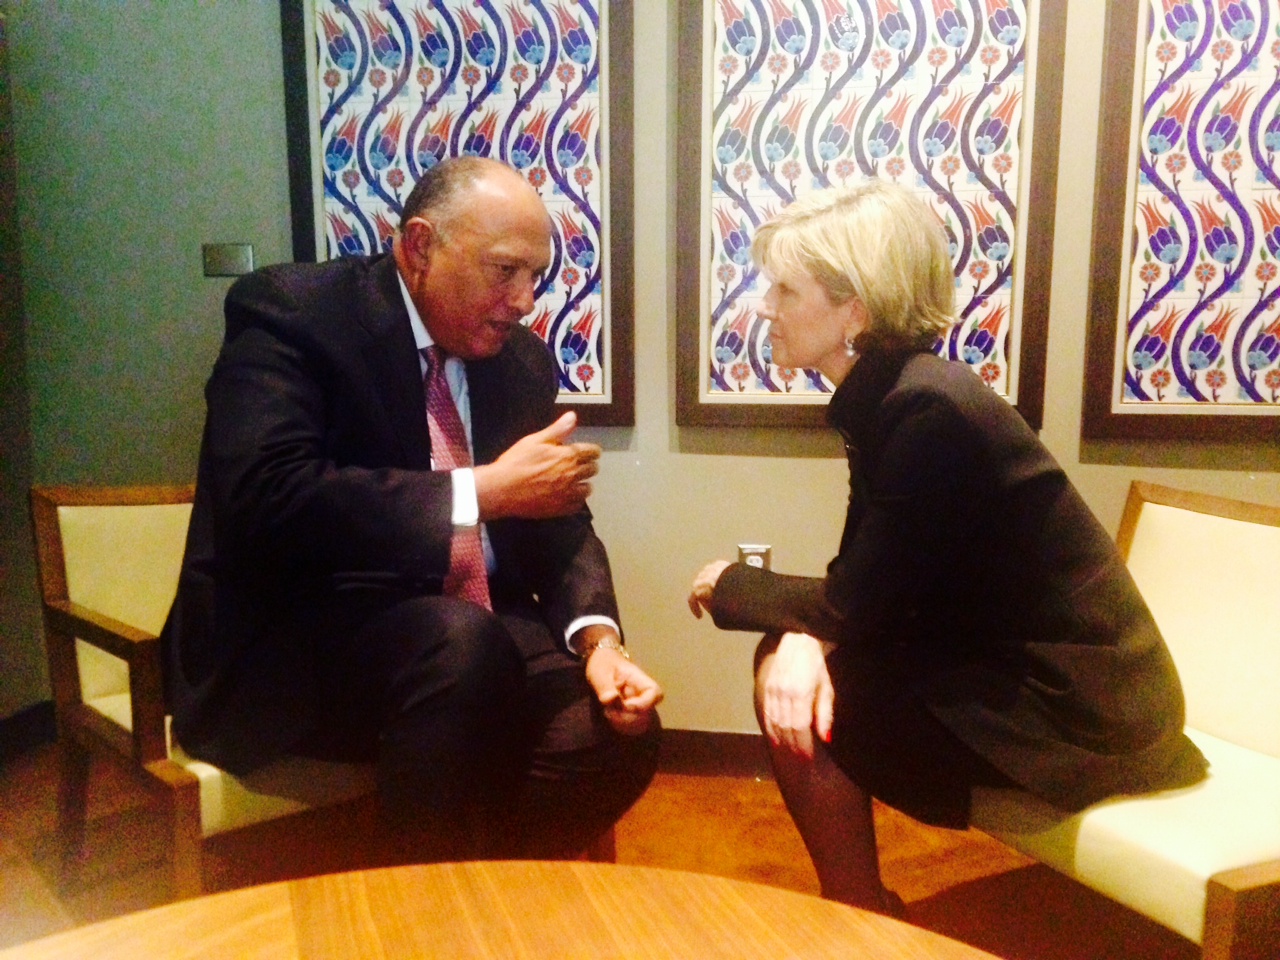 Julie Bishop meets with Egyptian Foreign Minister, Sameh Hassan Shoukry, at the United Nations in New York on 19 September 2014. (Trevor Collens/DFAT)